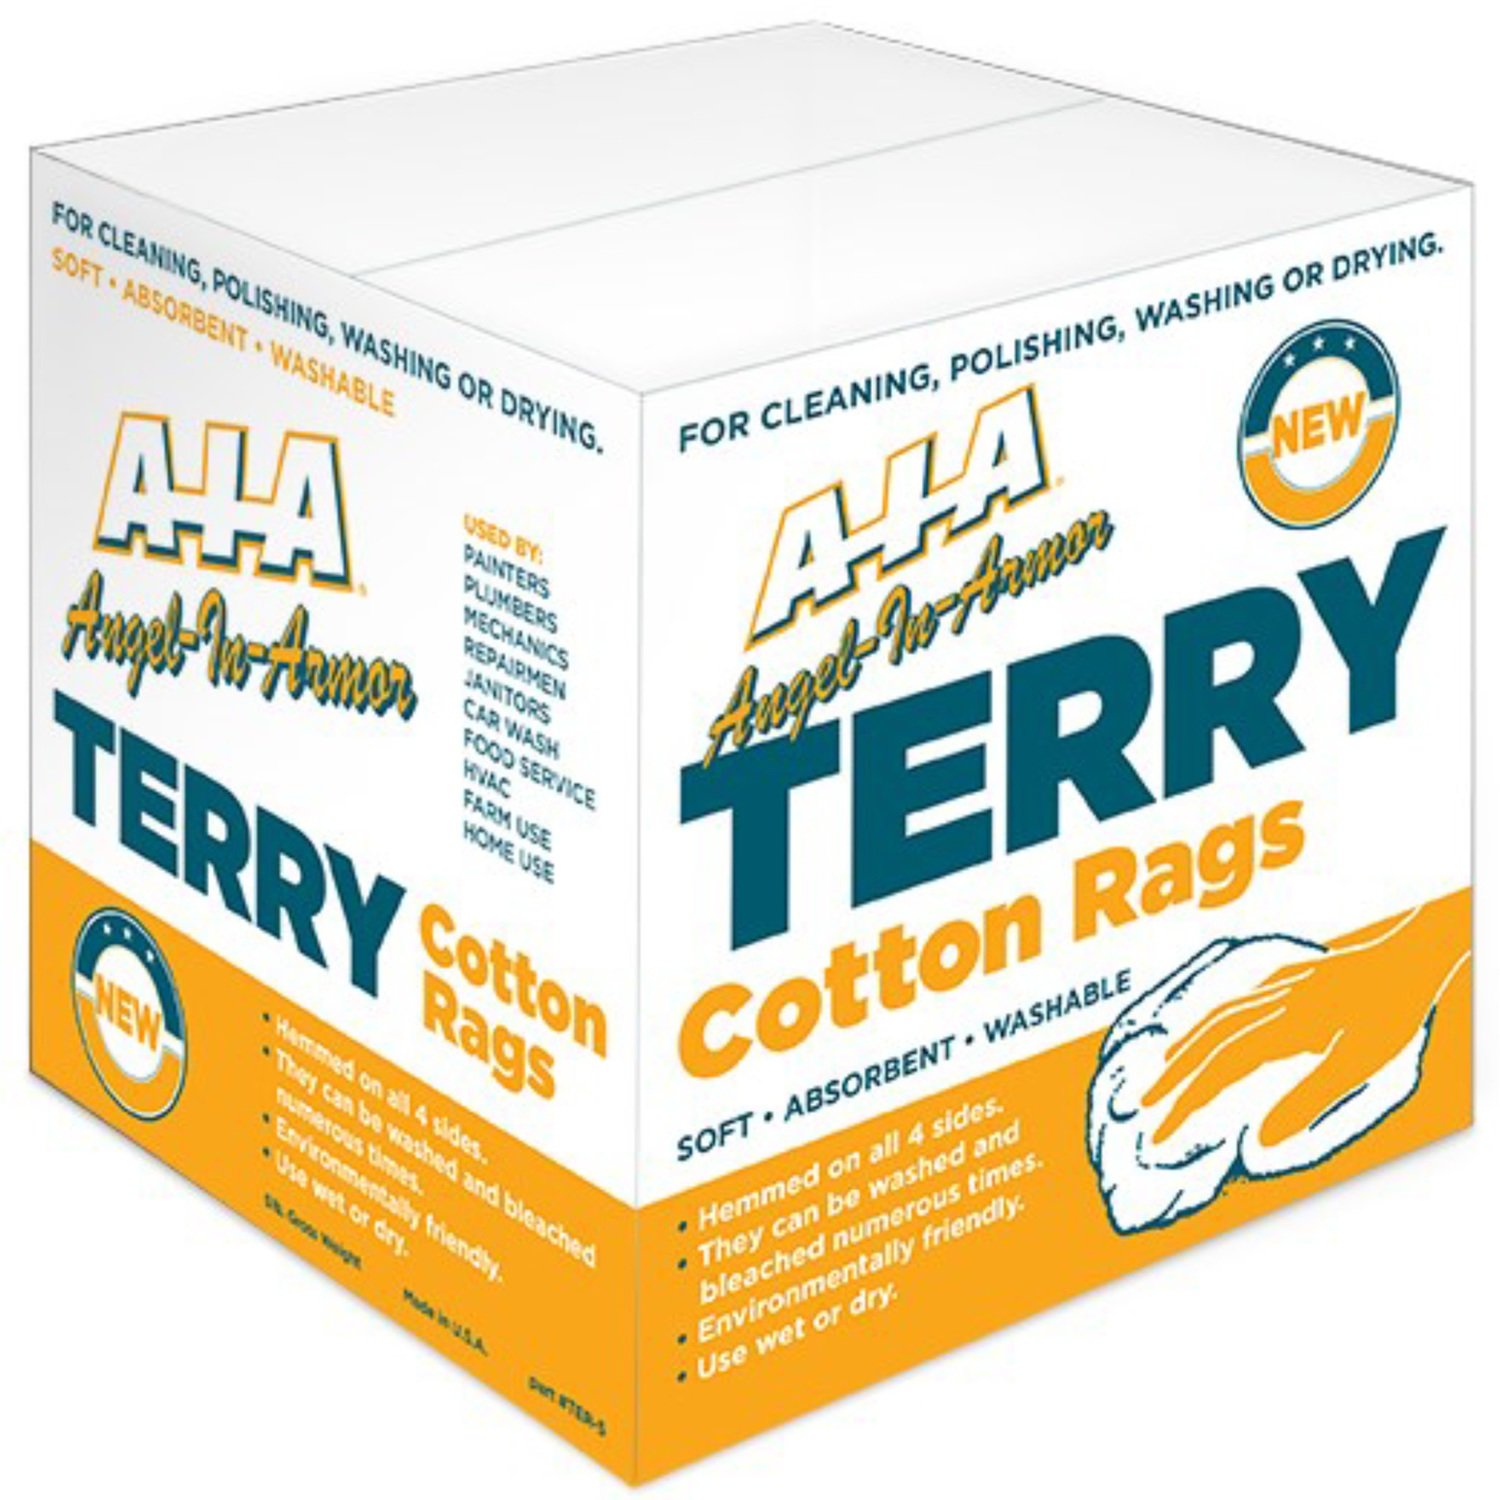 5 Lb. Box of New White Cotton Terry Wiping Cloths Bar Towels